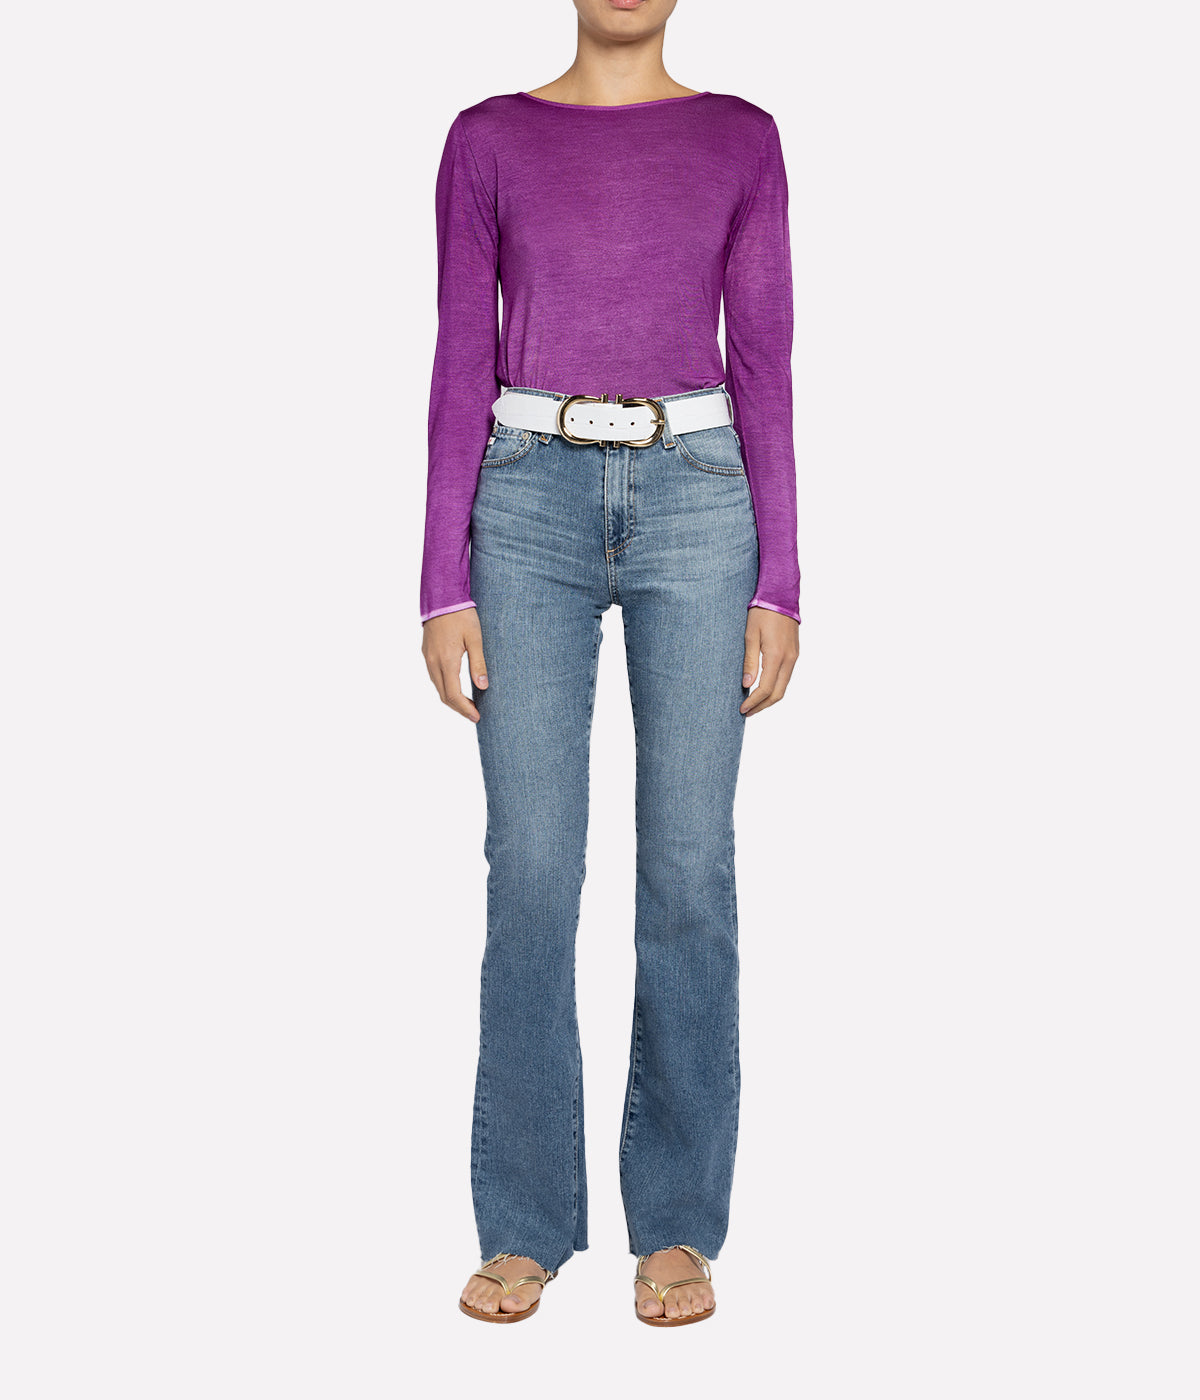 Round Neck Micromodal Long Sleeves T-Shirt in Orchid